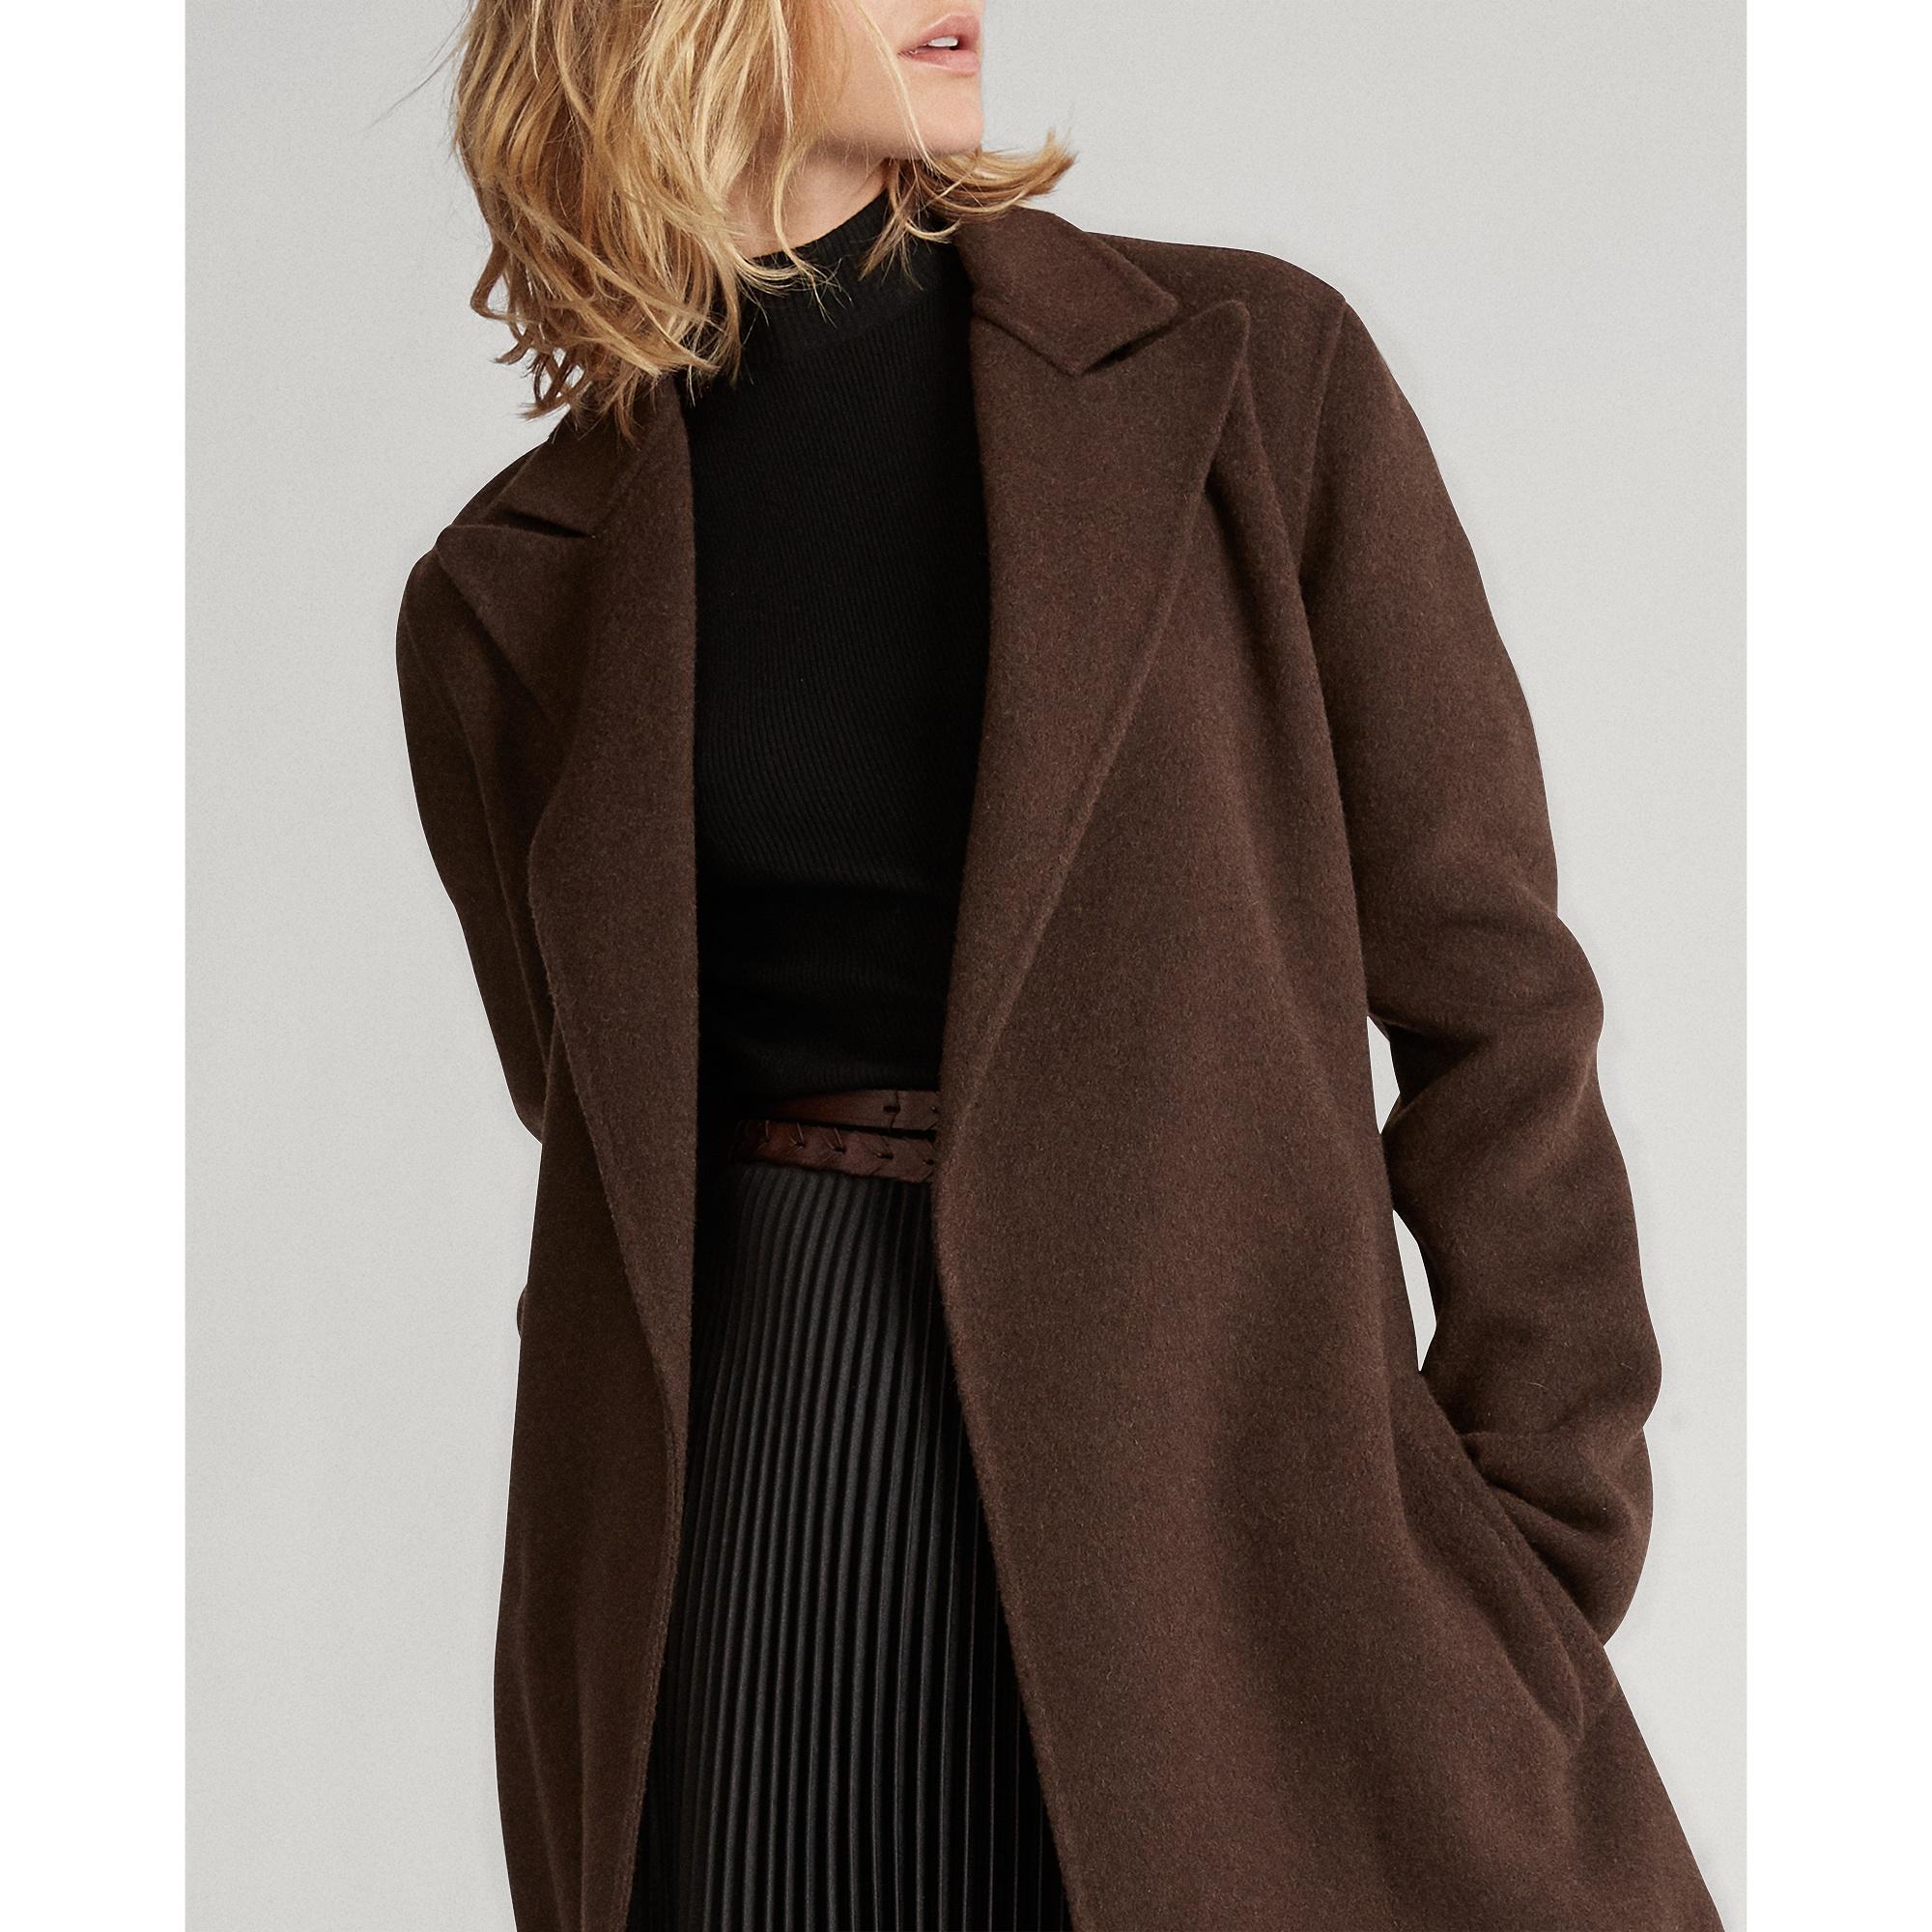 Polo Ralph Lauren Wo Brown Coat With Lapels | Lyst